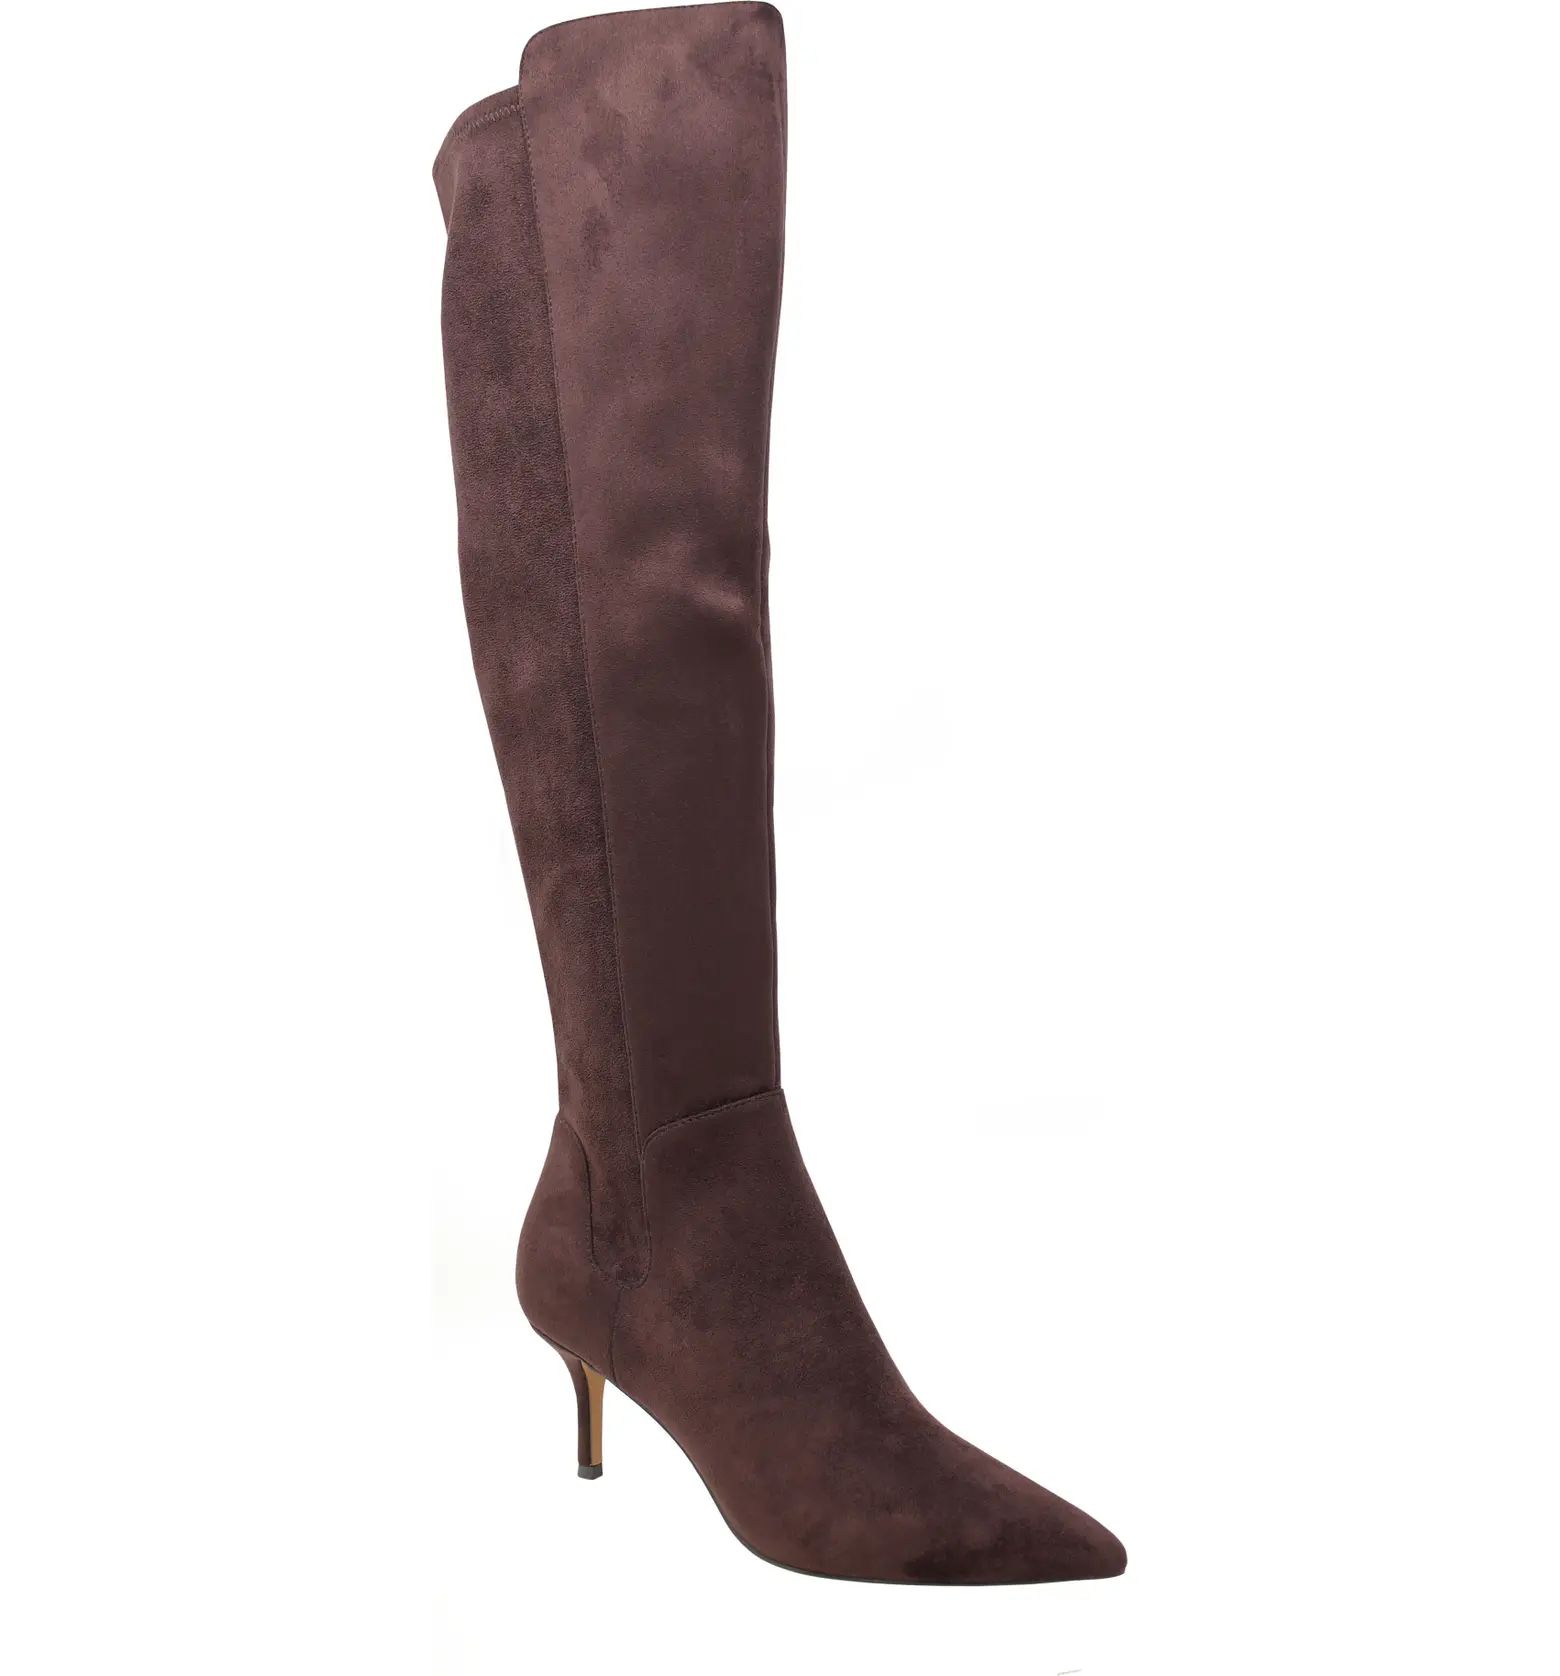 Charles by Charles David Charles David Atypical Over the Knee Boot | Nordstrom | Nordstrom